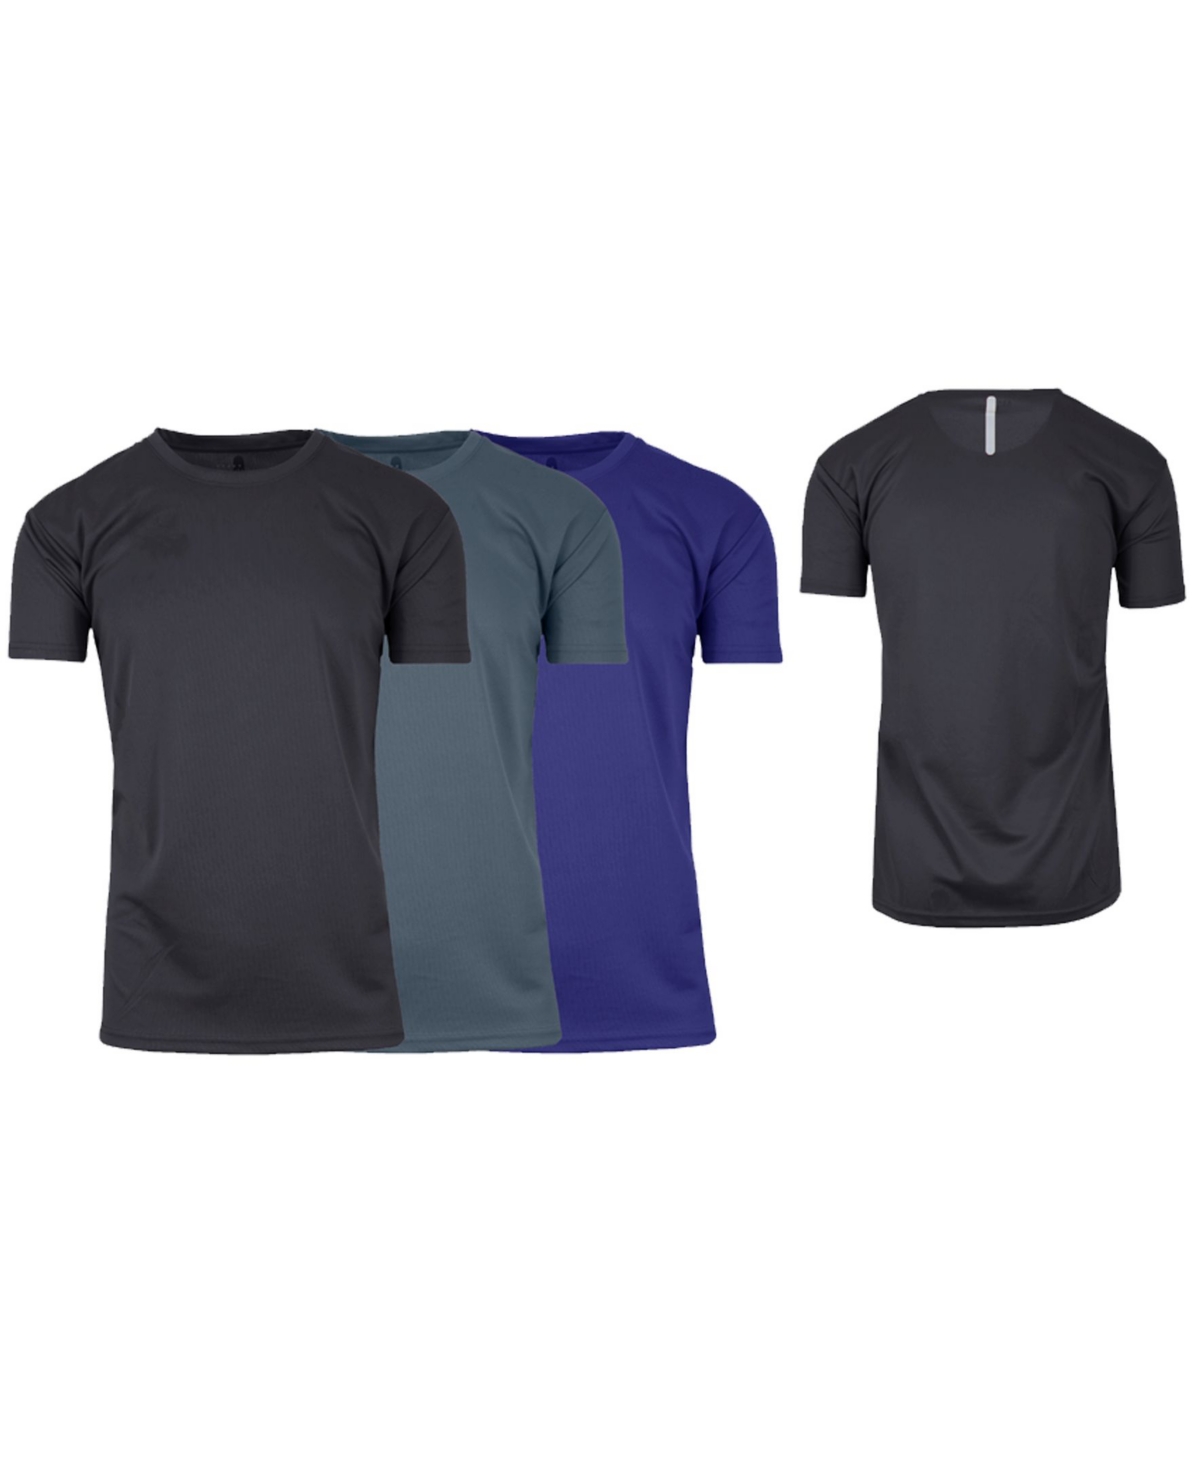 Galaxy By Harvic Men's Short Sleeve Moisture-wicking Quick Dry Performance Tee, Pack Of 3 In Black,charcoal,navy